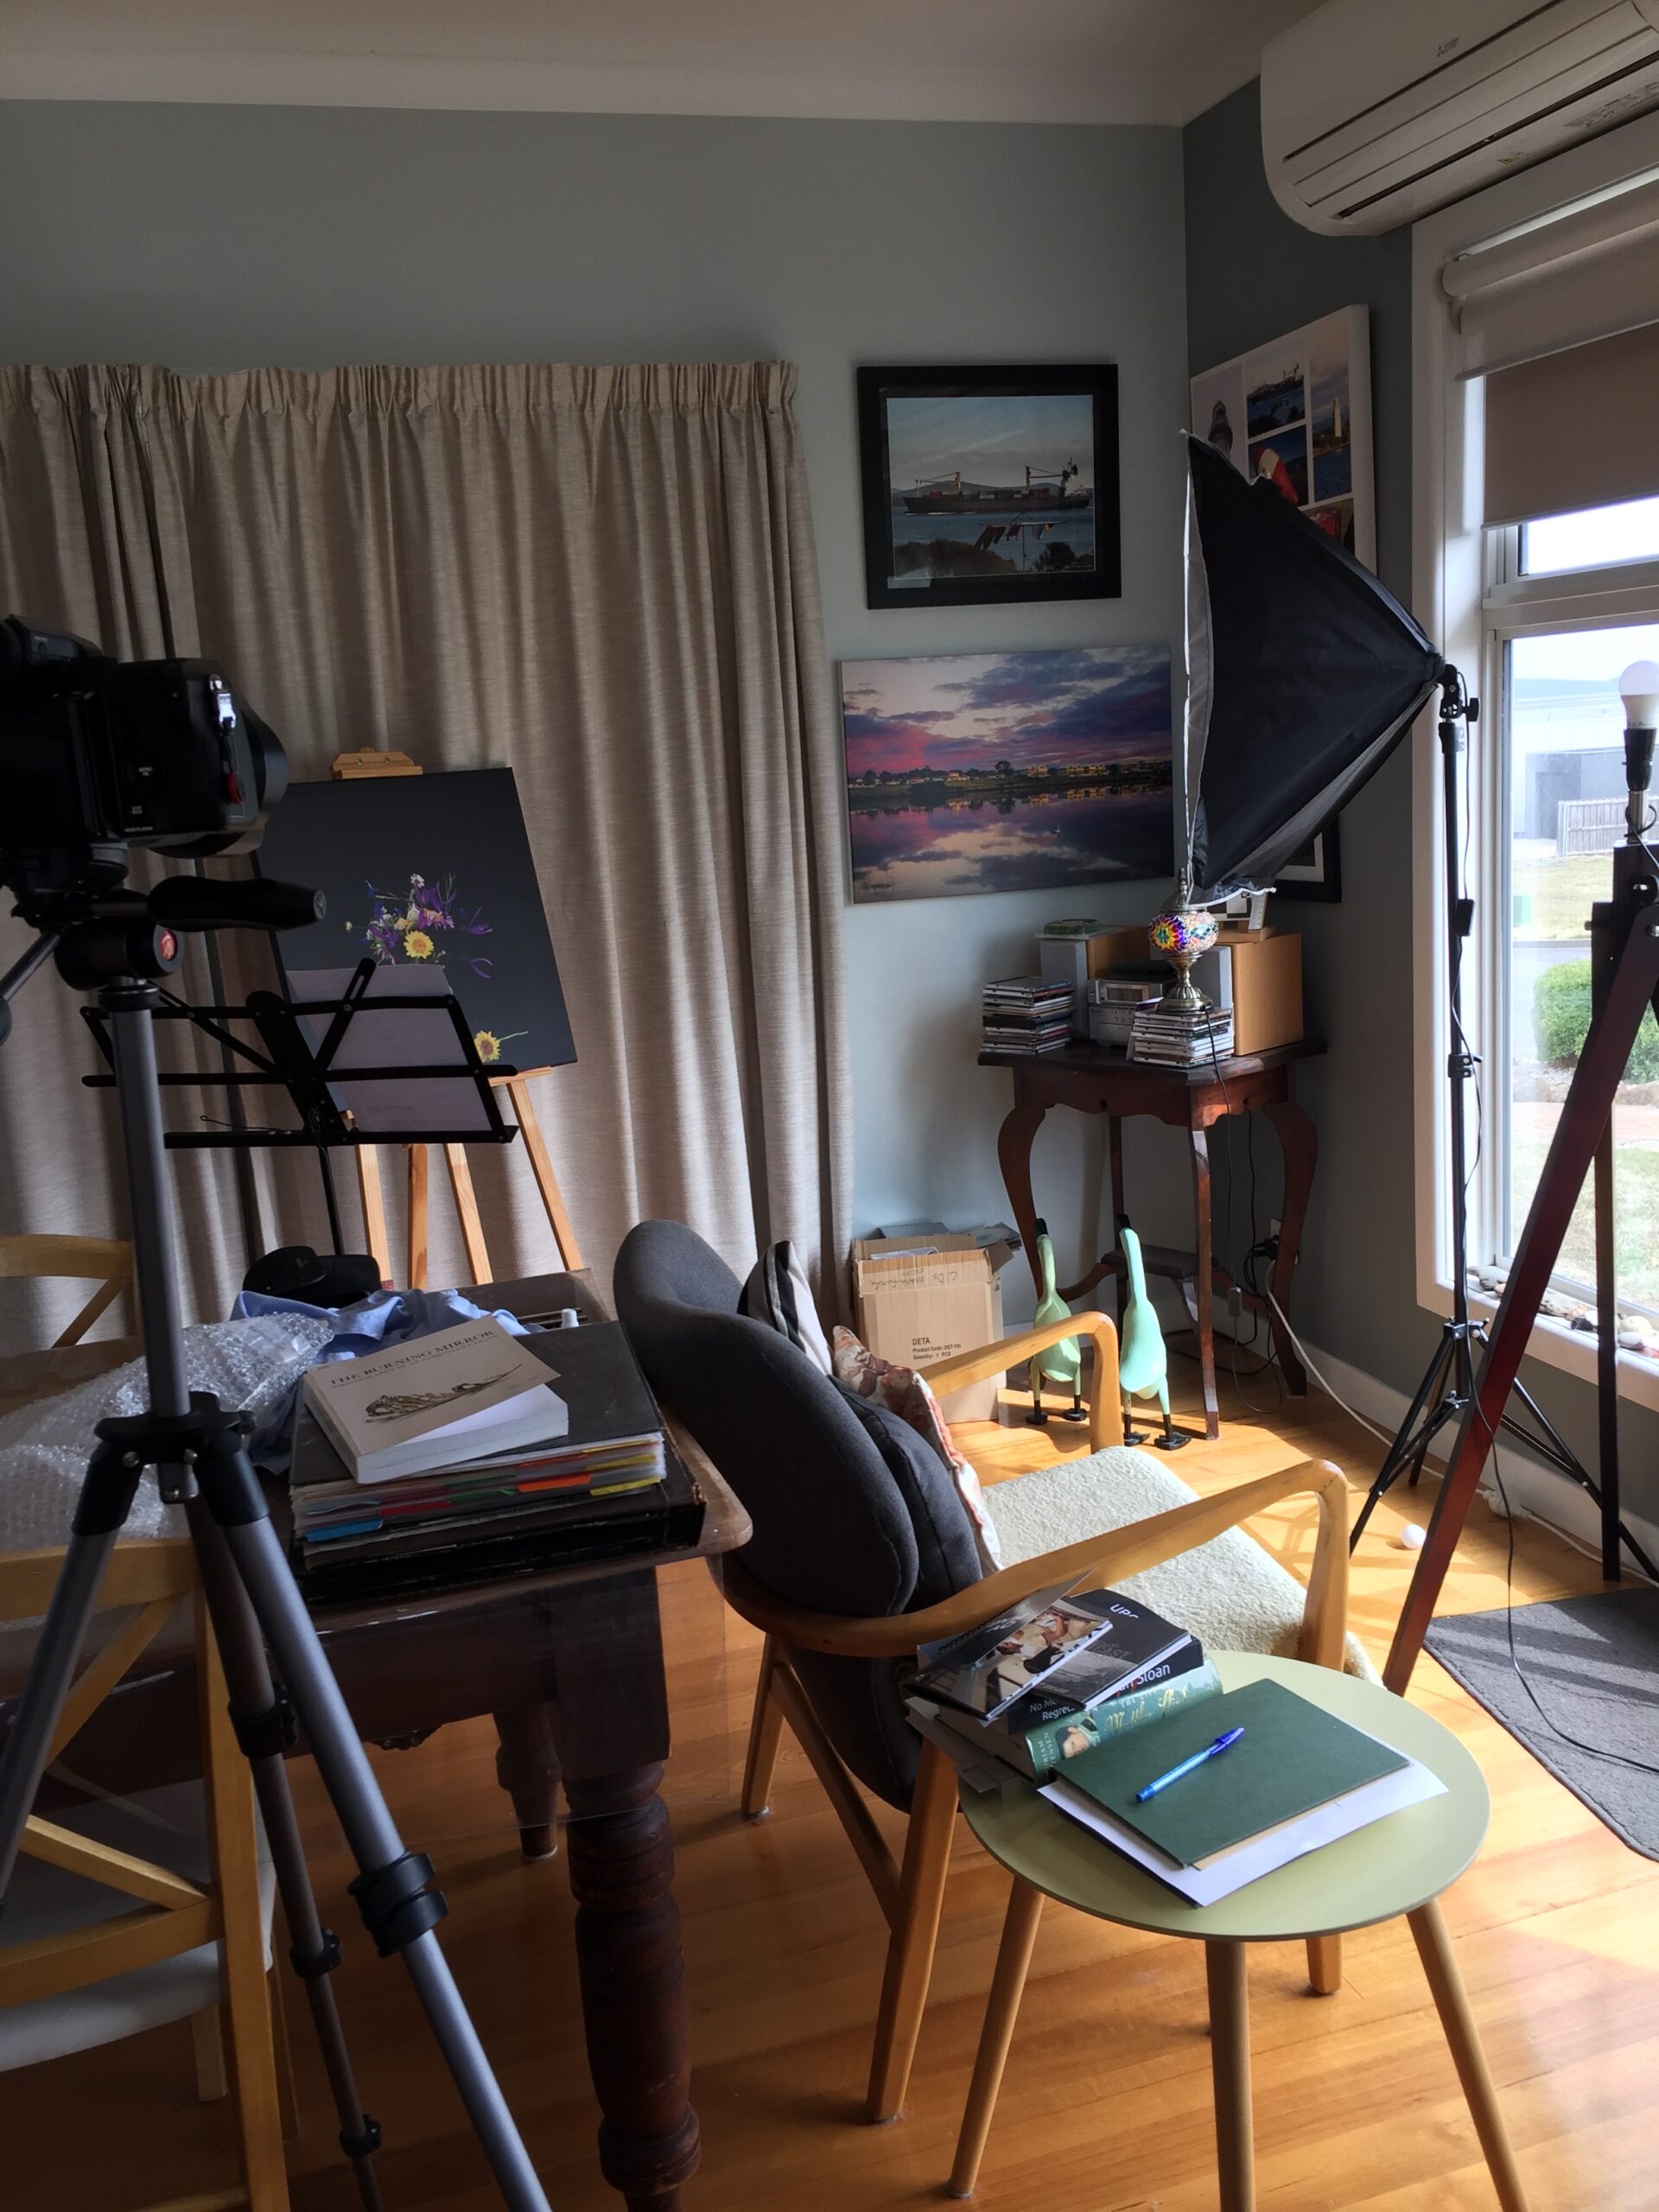 Image shows a photography studio for Vince Brophy Artist Profile story with Art Trails Tasmania